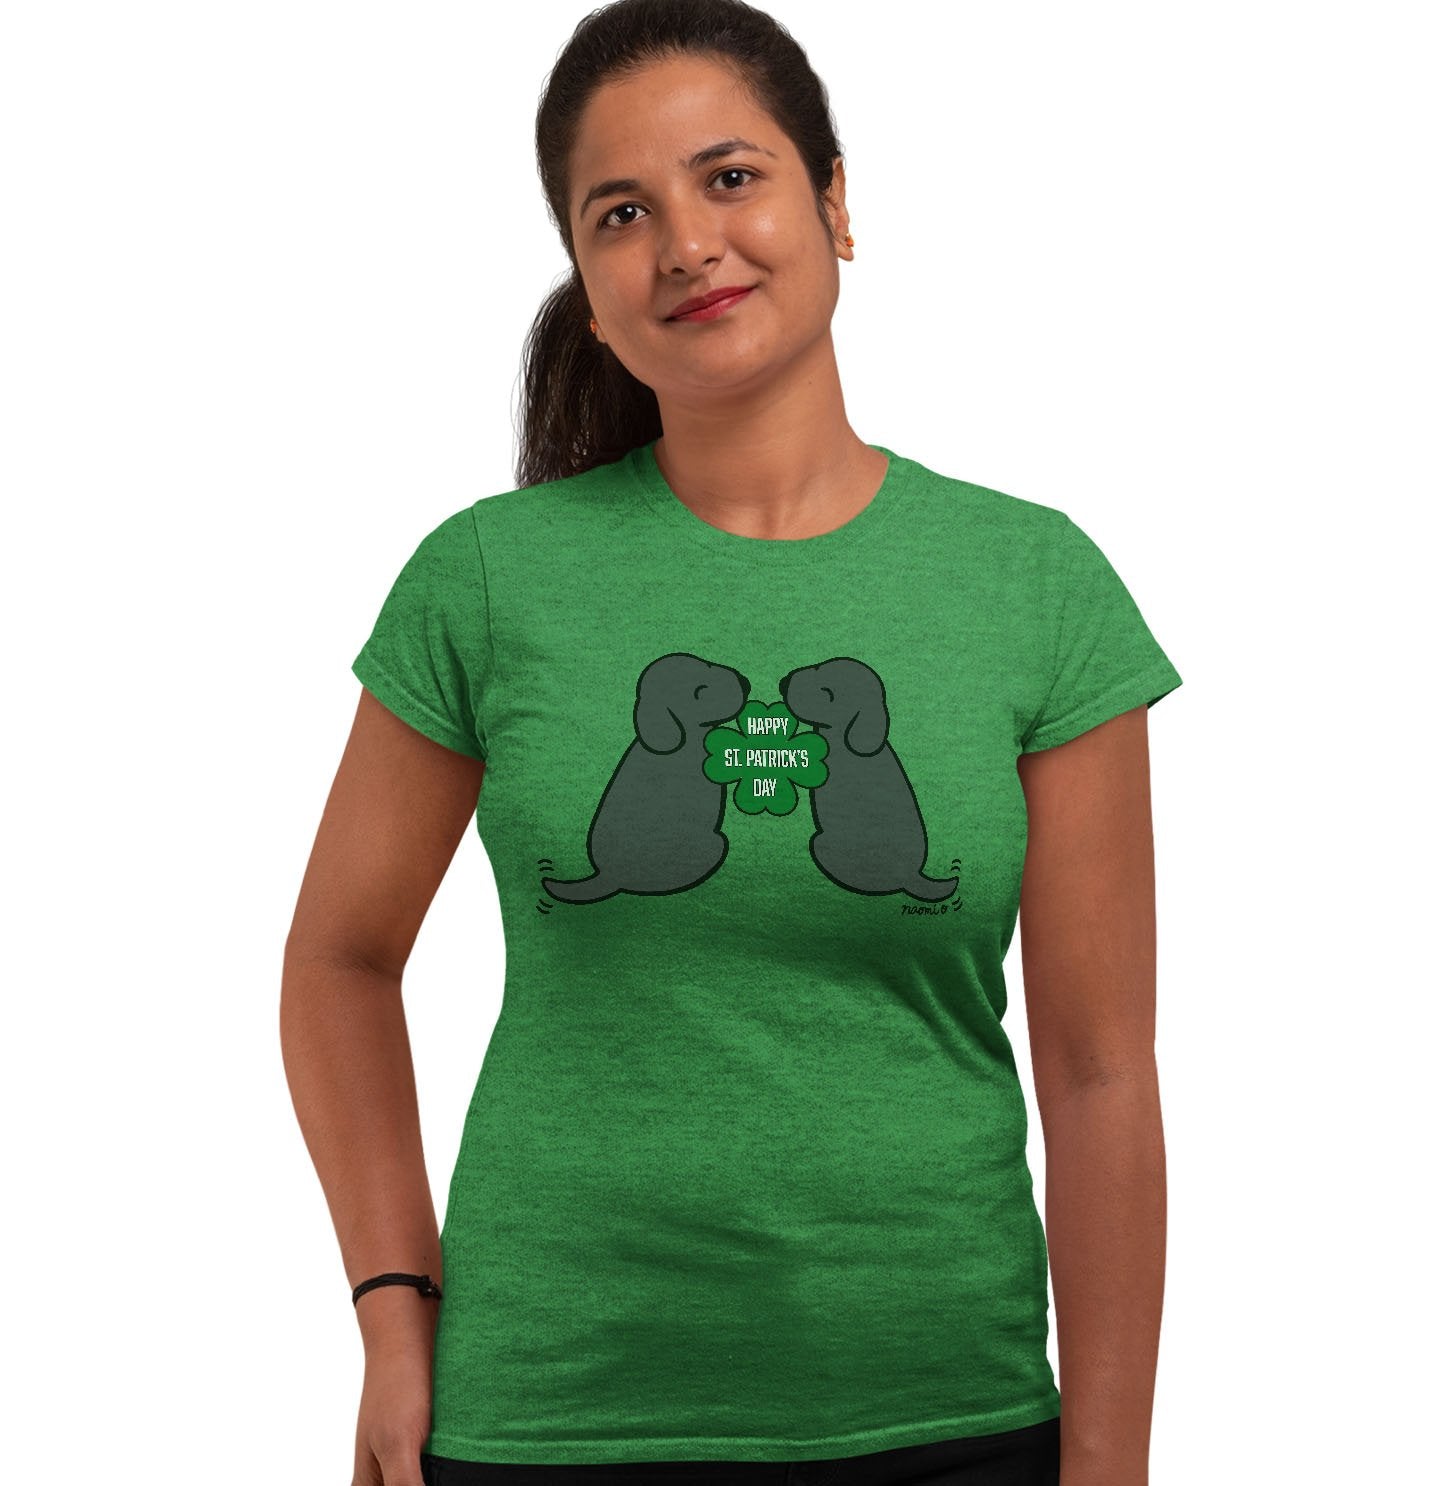 Happy St. Patrick's Day Black Lab Puppies - Women's Fitted T-Shirt